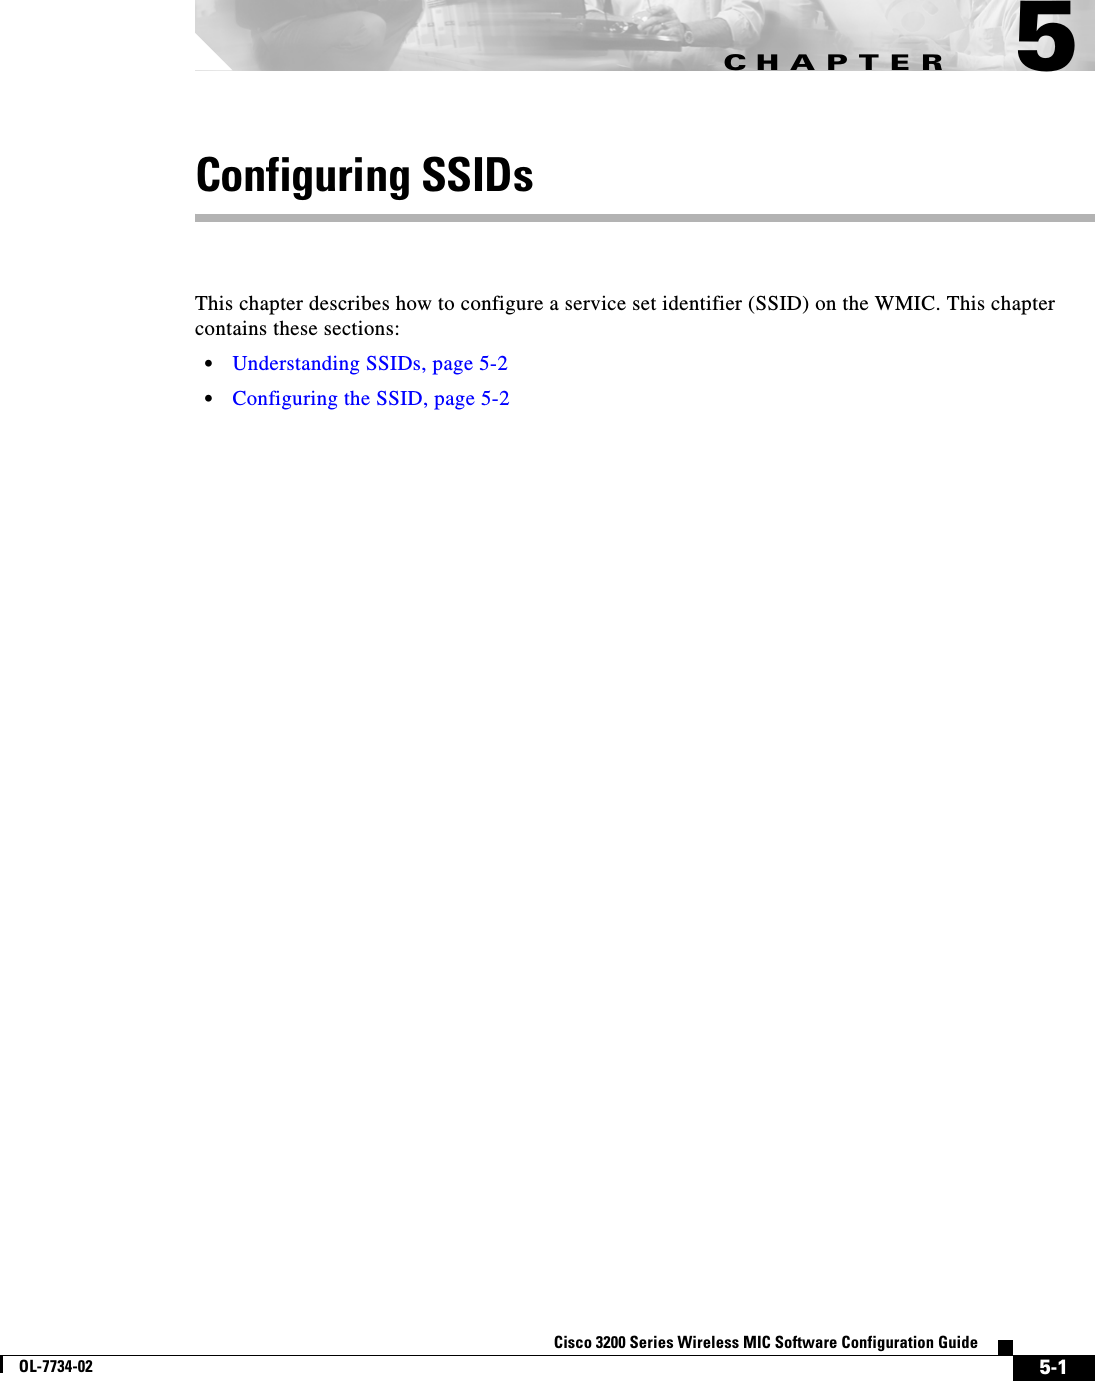 CHAPTER5-1Cisco 3200 Series Wireless MIC Software Configuration GuideOL-7734-025Configuring SSIDsThis chapter describes how to configure a service set identifier (SSID) on the WMIC. This chapter contains these sections:•Understanding SSIDs, page 5-2•Configuring the SSID, page 5-2